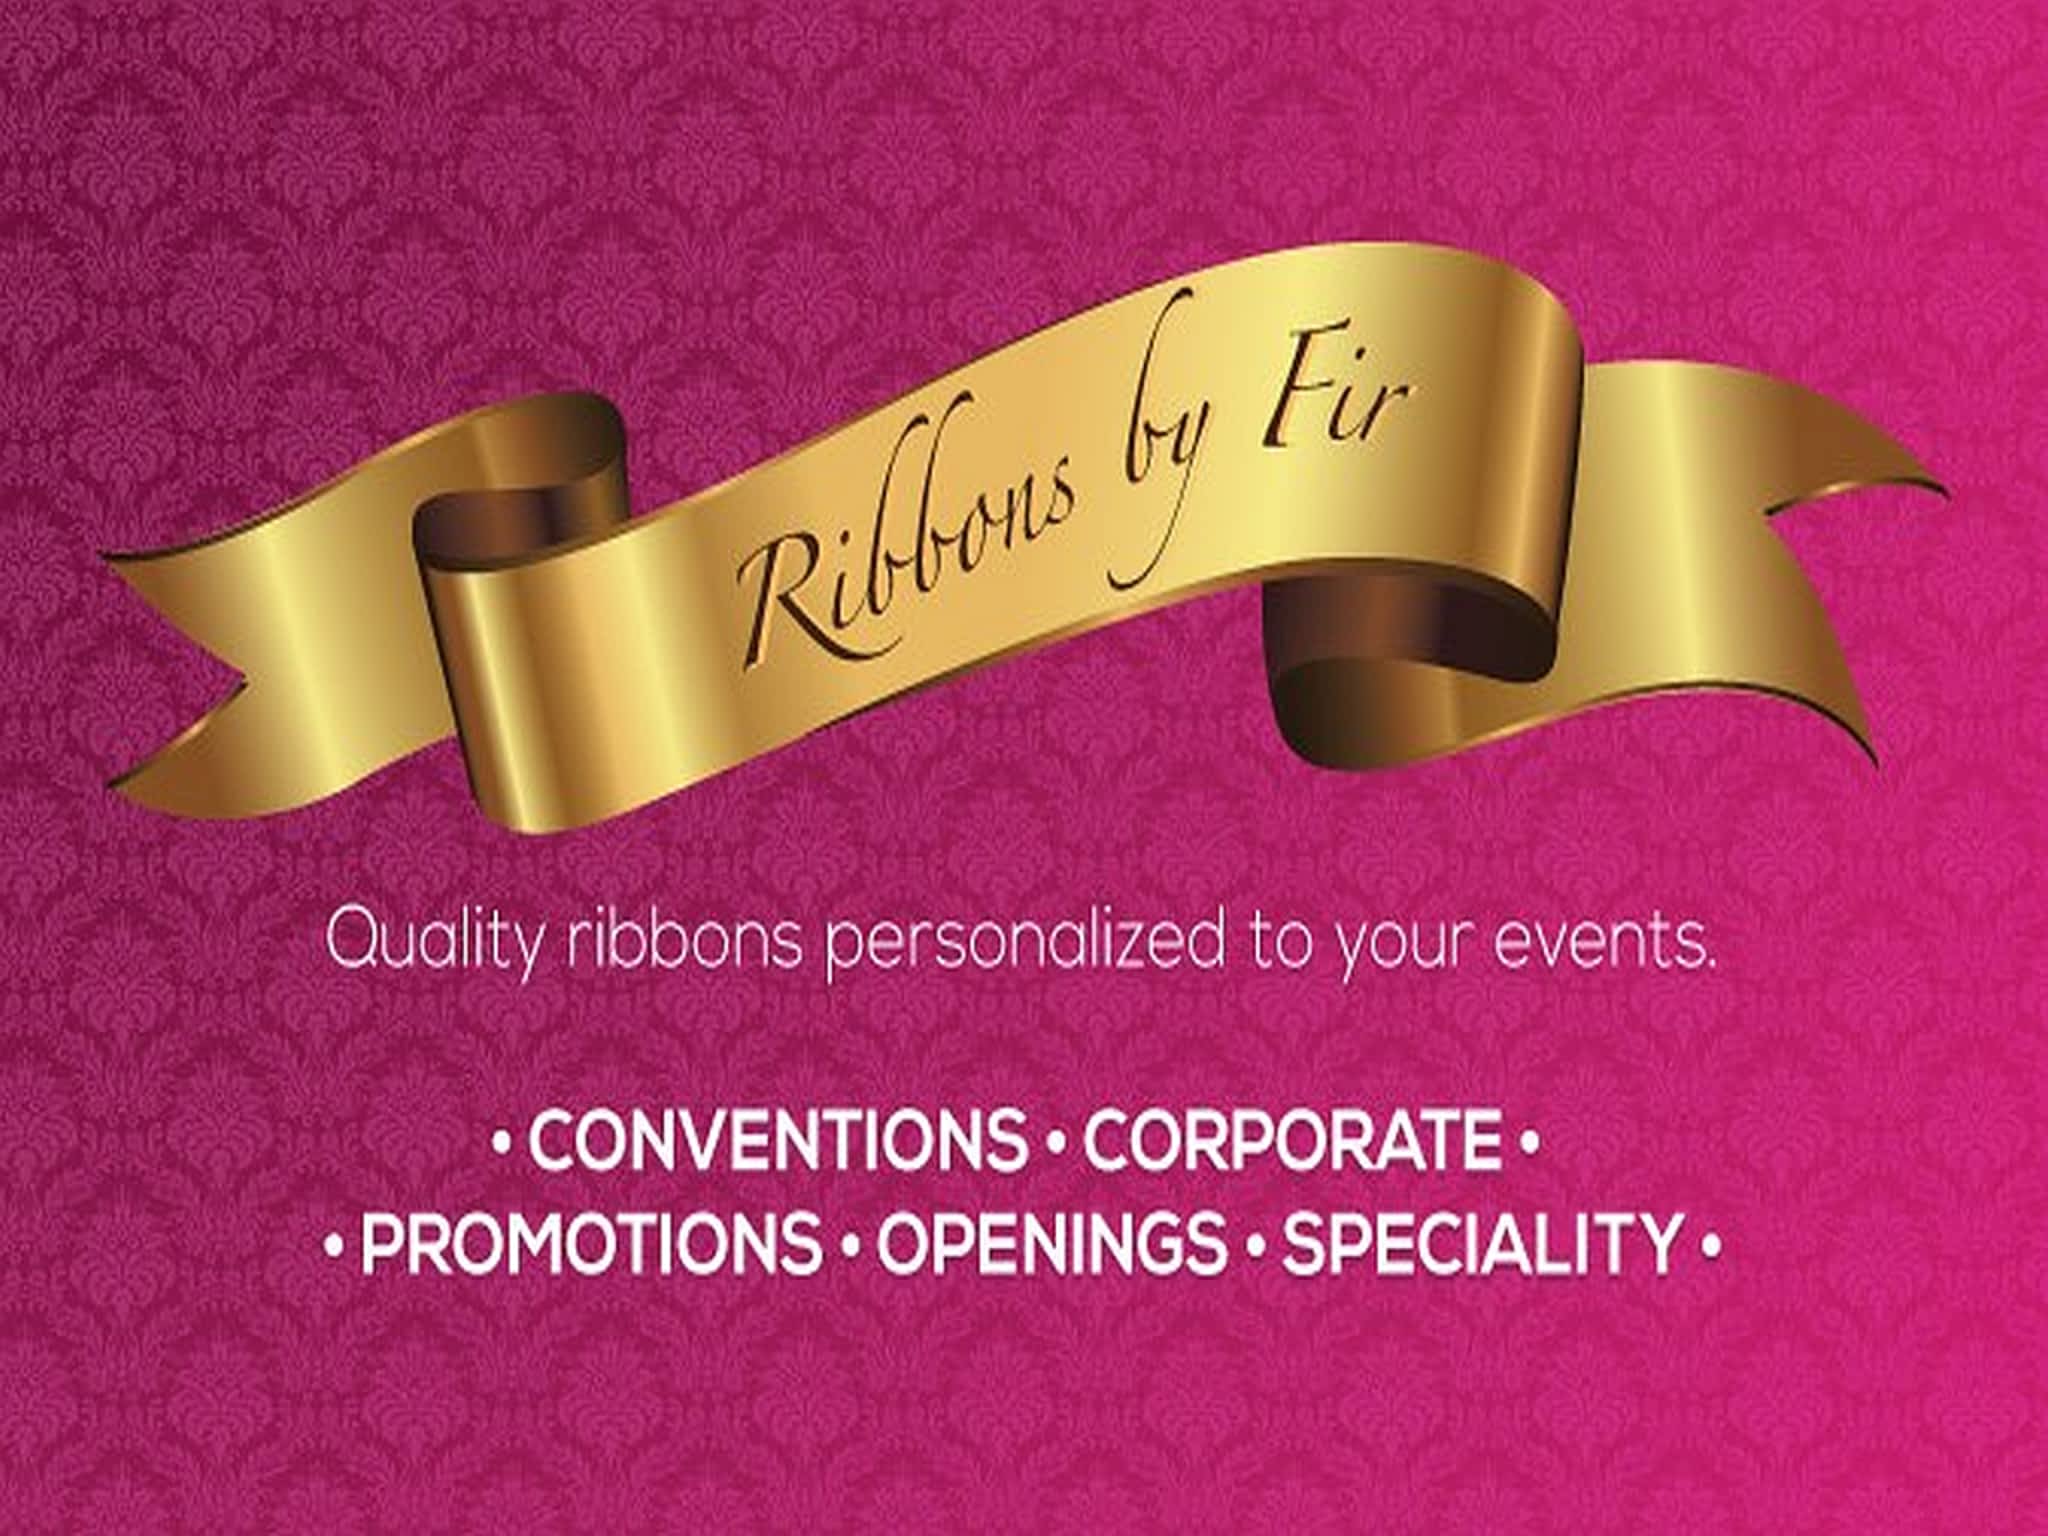 photo Ribbons by Fir